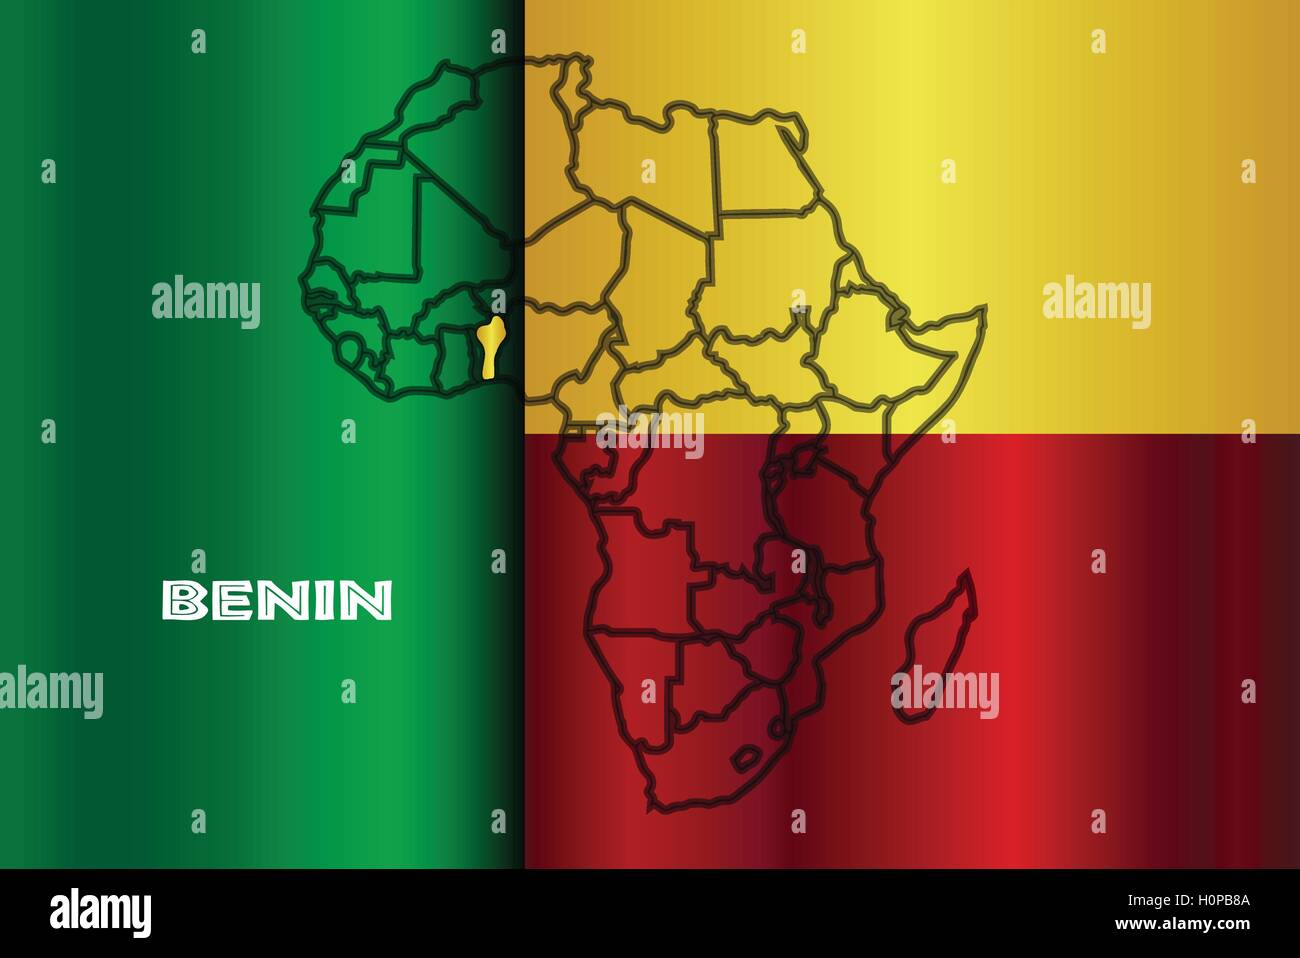 Benin outline inset into a map of Africa over a flag background Stock Vector